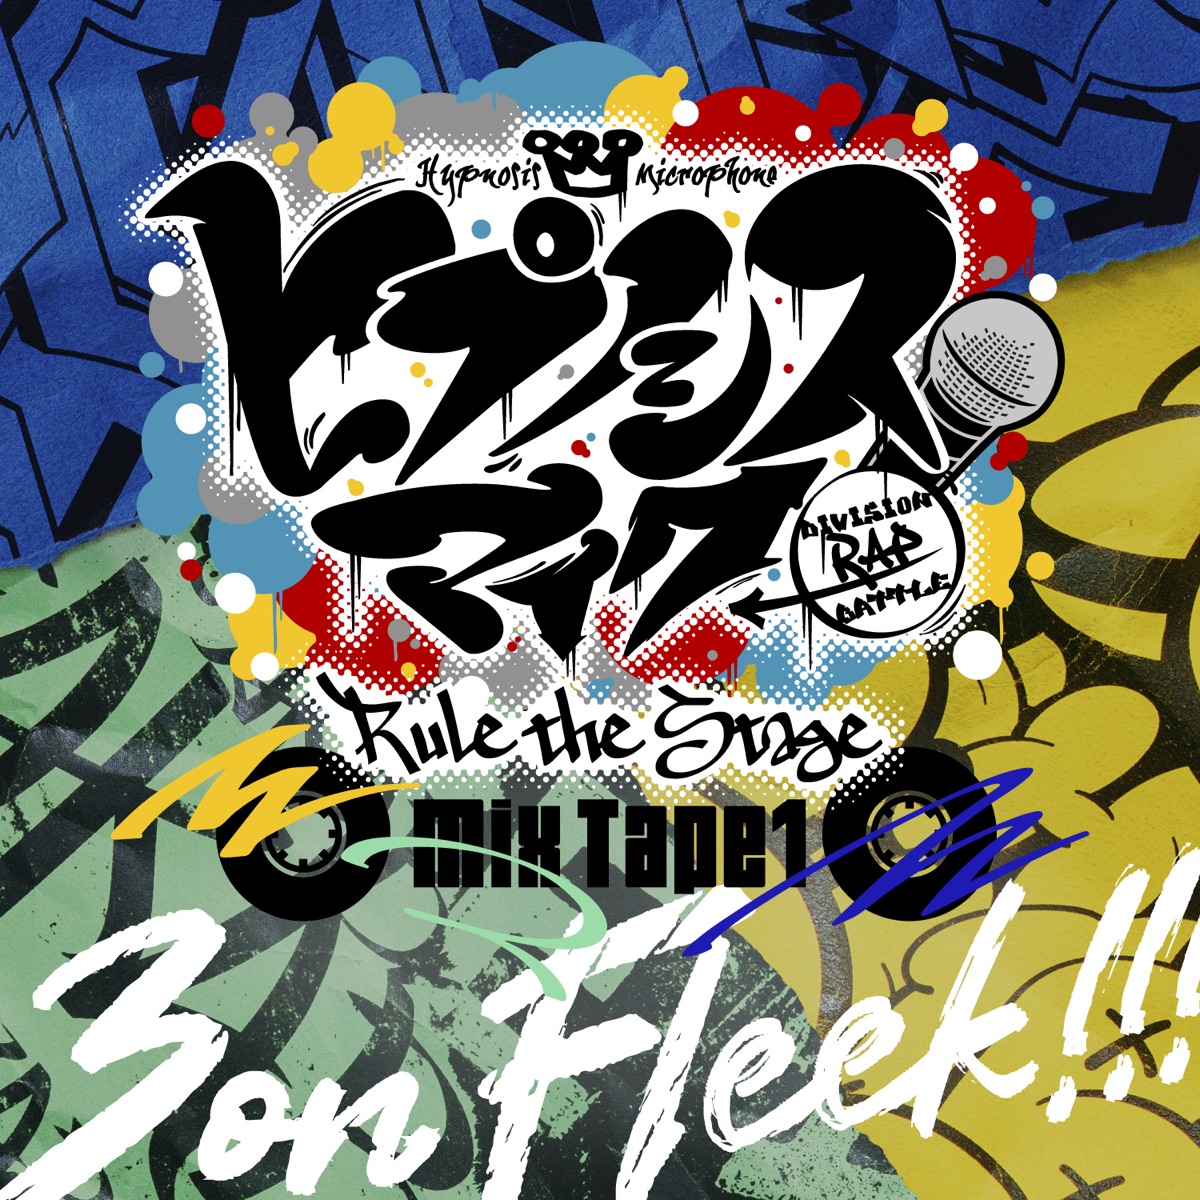 Cover art for『Hypnosis Mic -D.R.B- Rule the Stage (Mix Tape1 All Cast) - 3 on Fleek!!!』from the release『3 on Fleek!!!